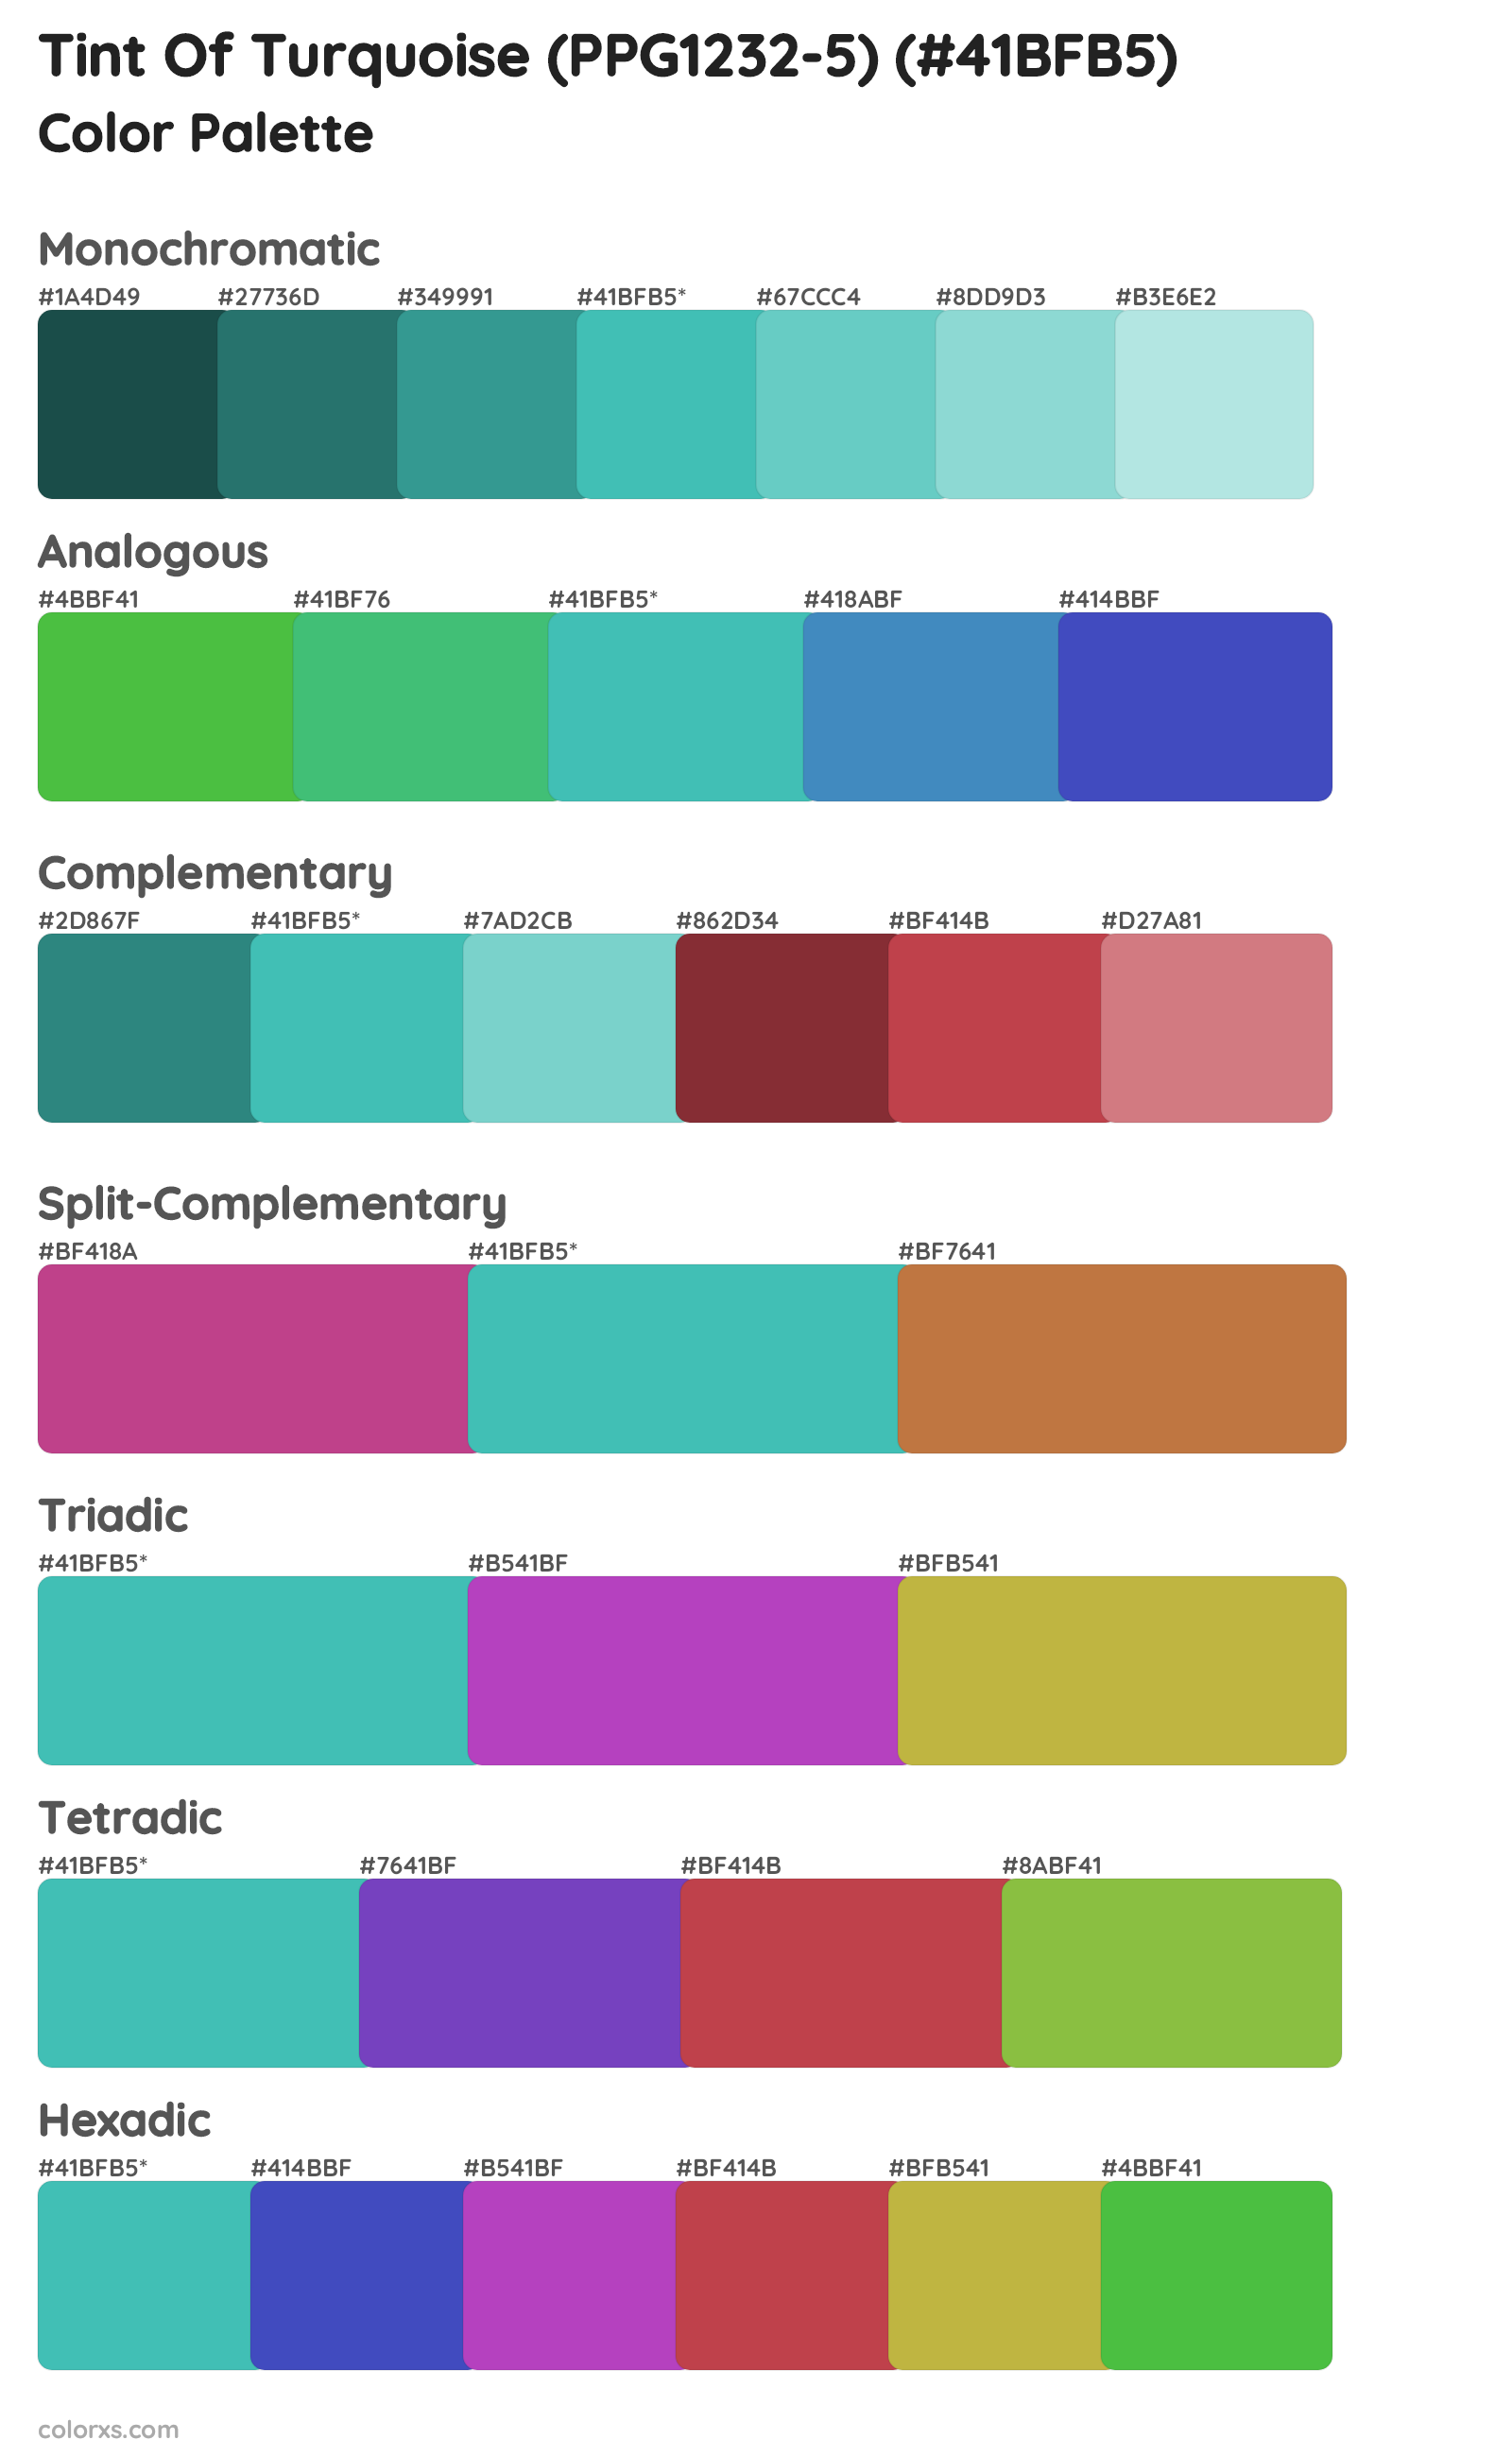 Tint Of Turquoise (PPG1232-5) Color Scheme Palettes